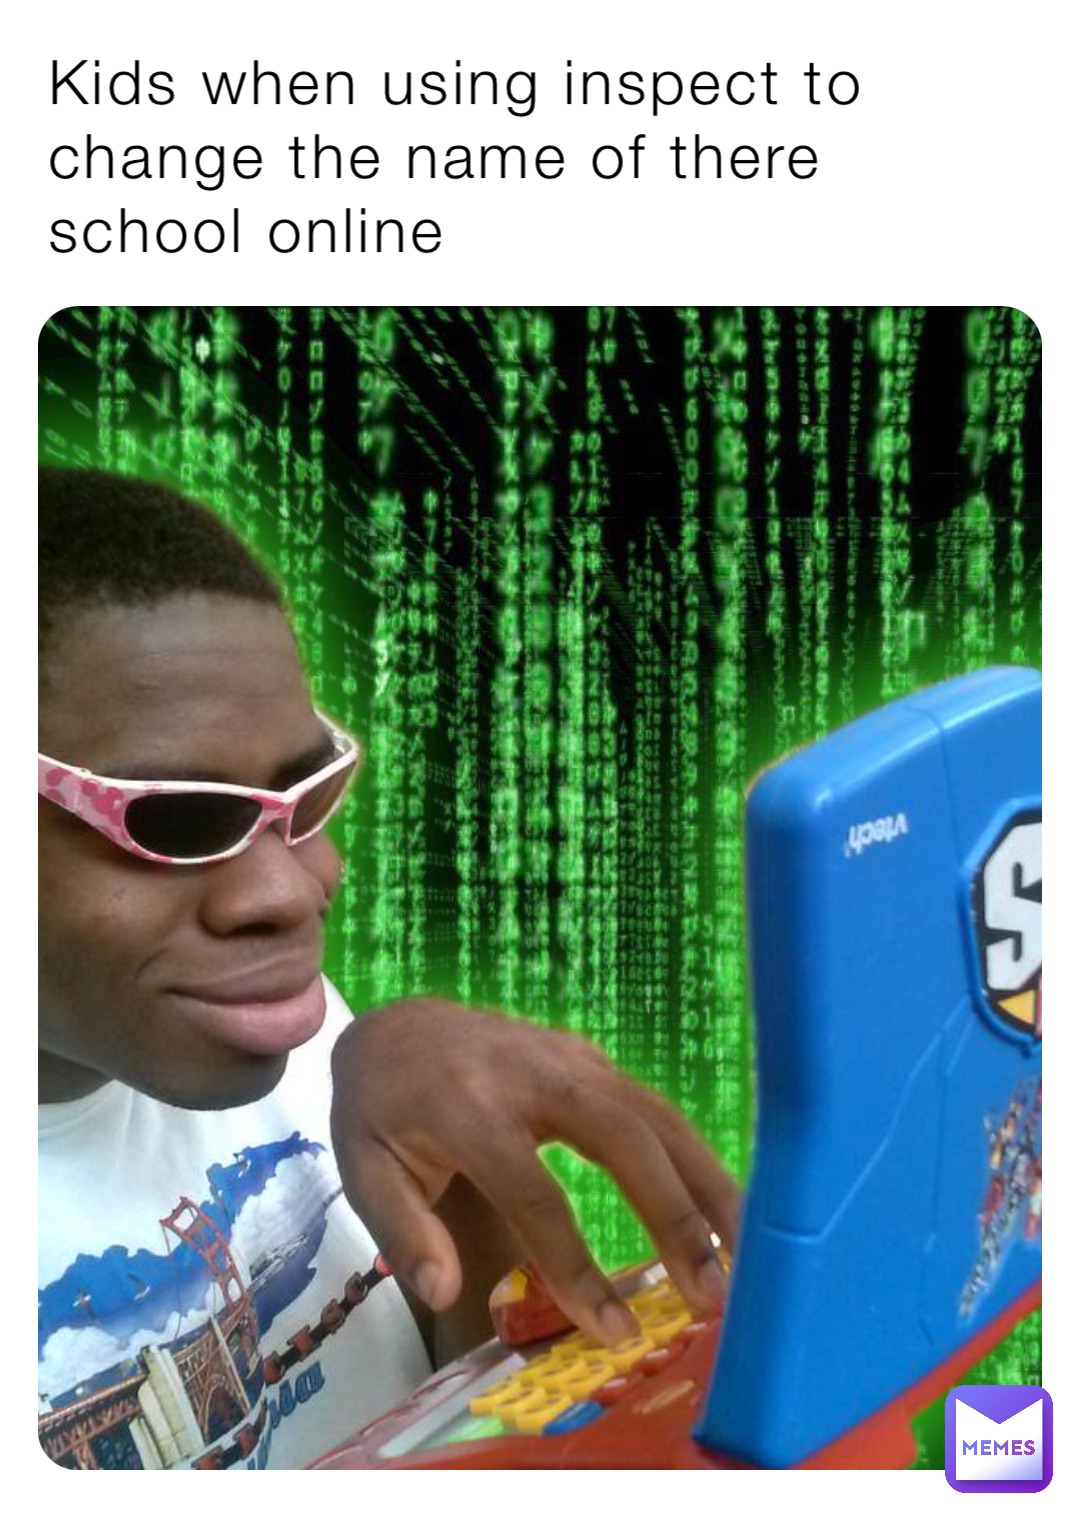 Kids when using inspect to change the name of there school online